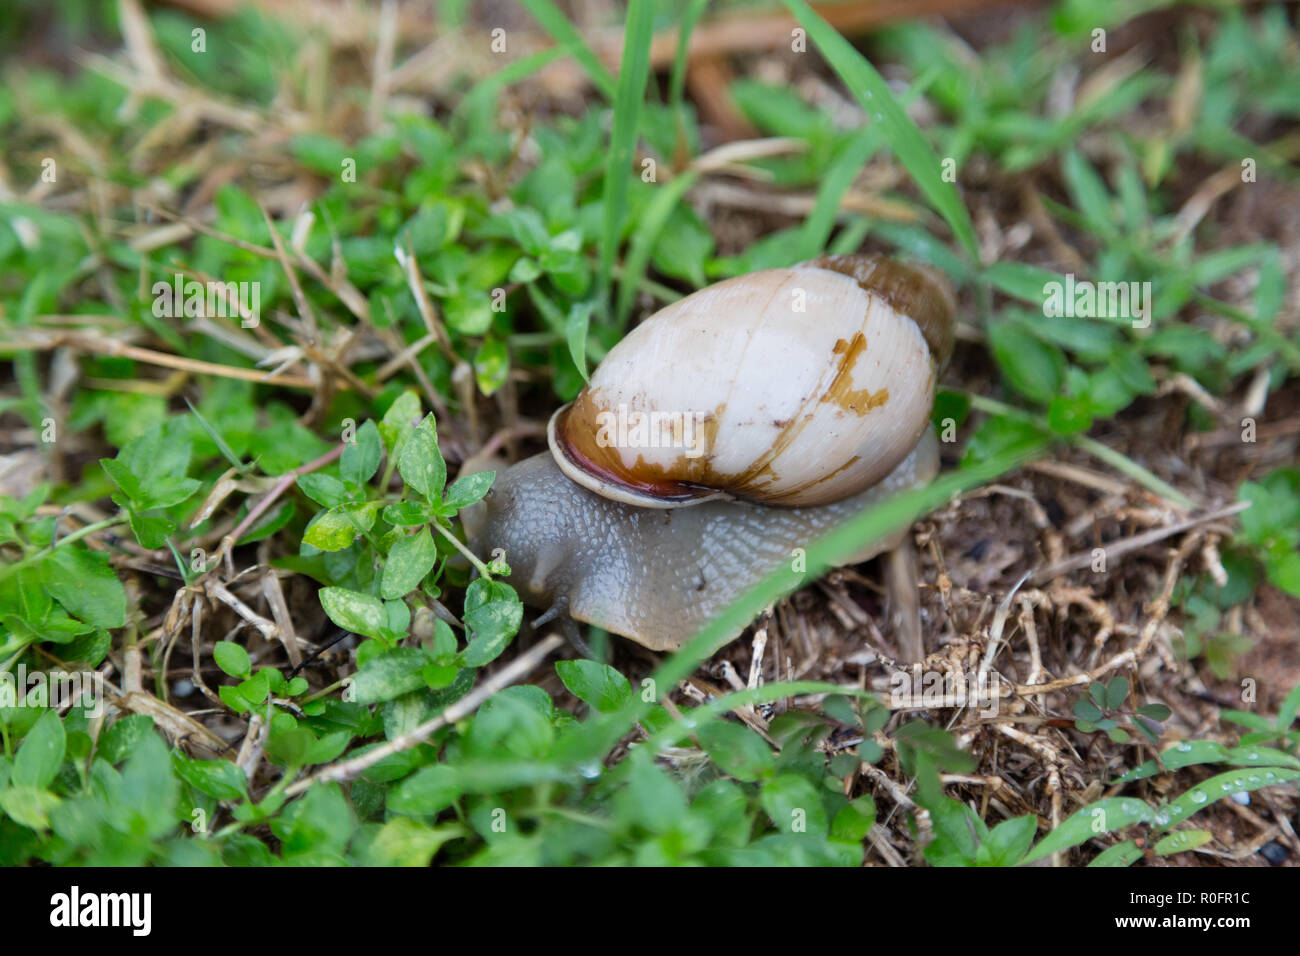 Land snail (Megalobulimus sp.) comes out after the rain to rasp softened nutrients from the surfaces of plants on the ground, Asuncion, Paraguay Stock Photo